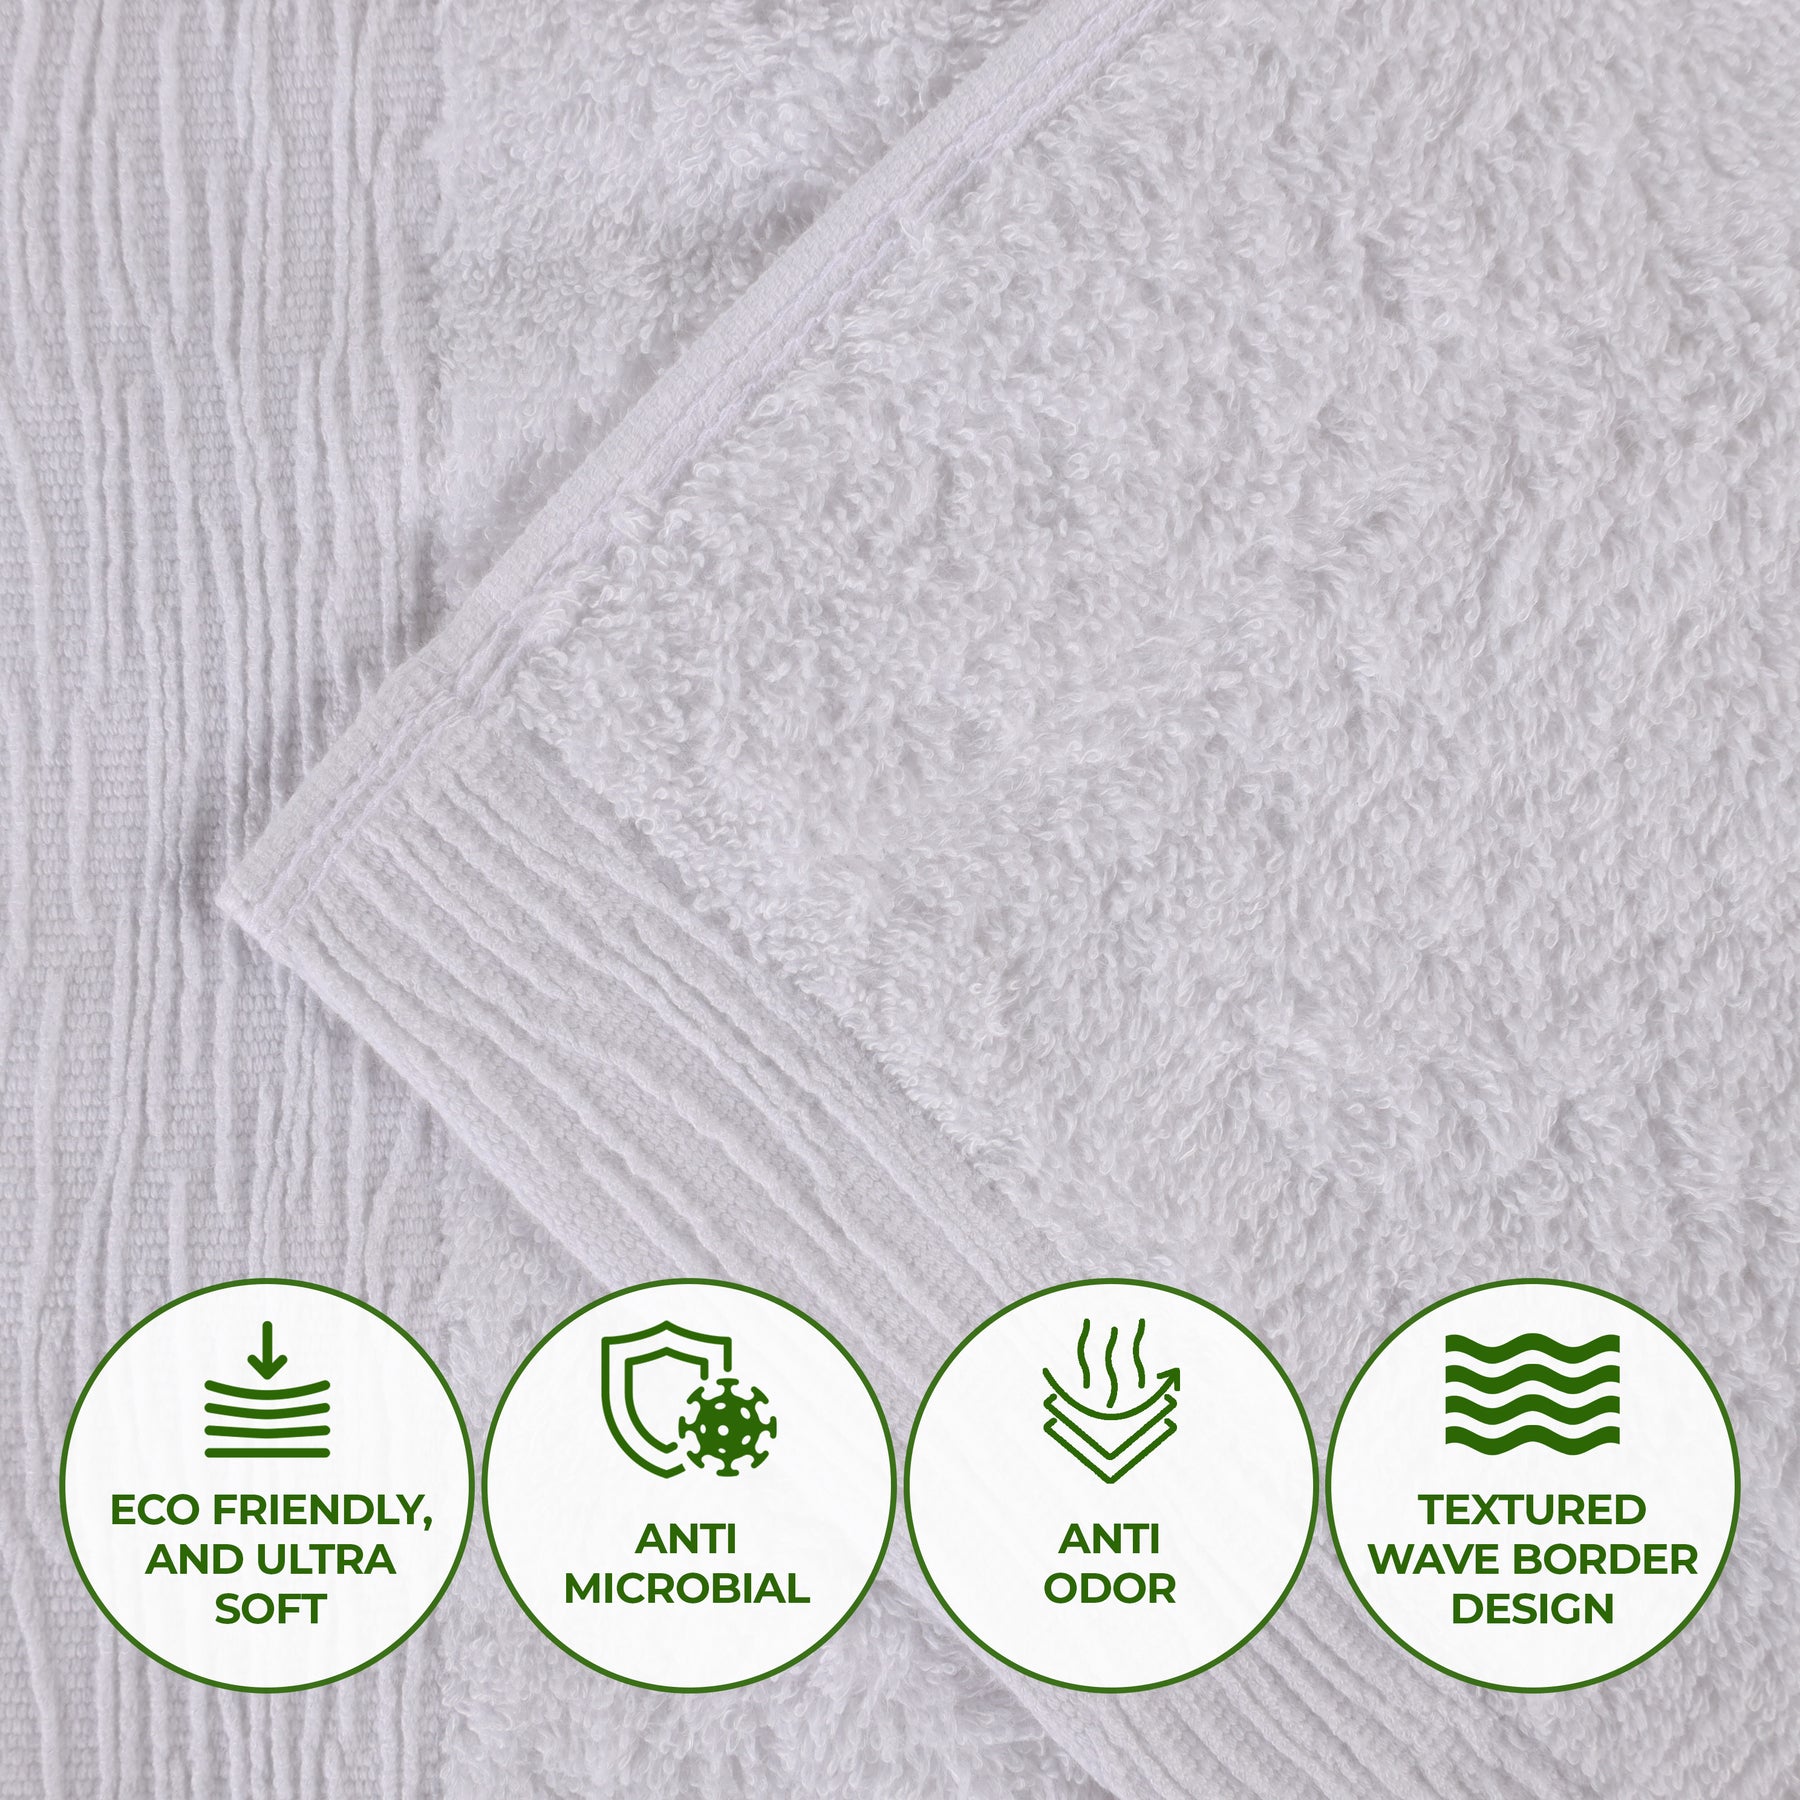 Rayon from Bamboo Eco-Friendly Fluffy Soft Solid Bath Sheet - Whte